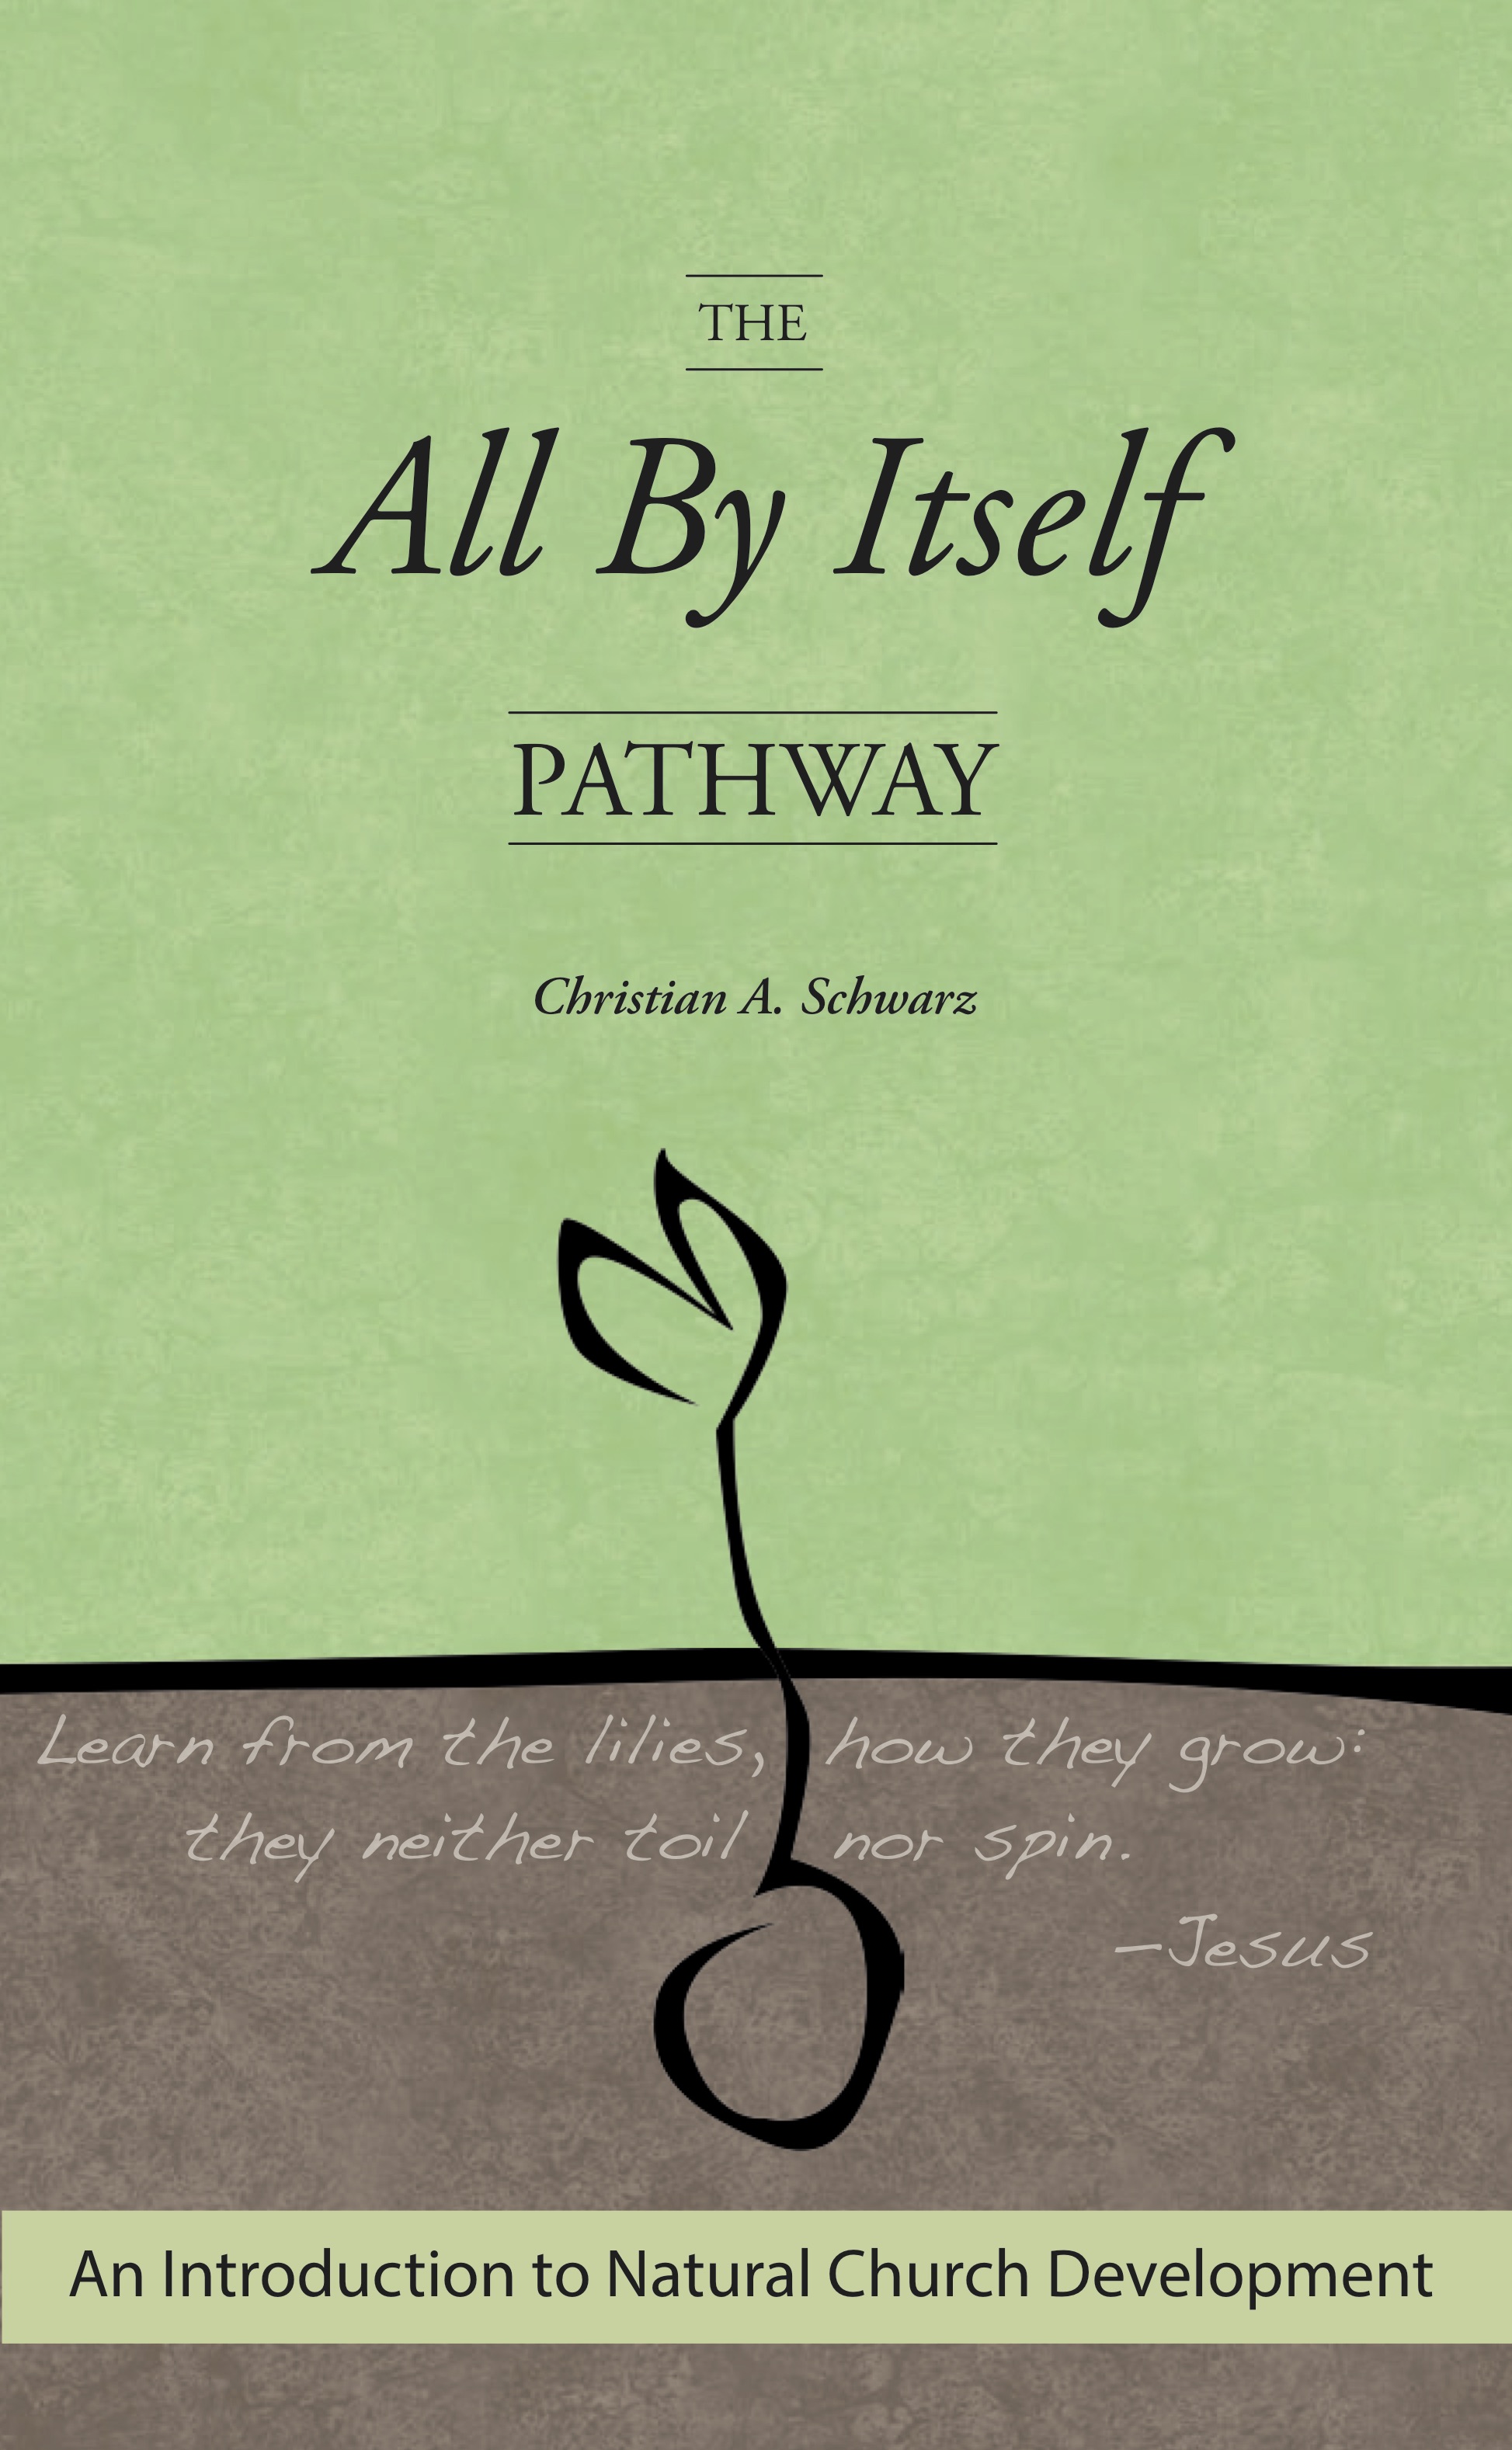 The All By Itself Pathway